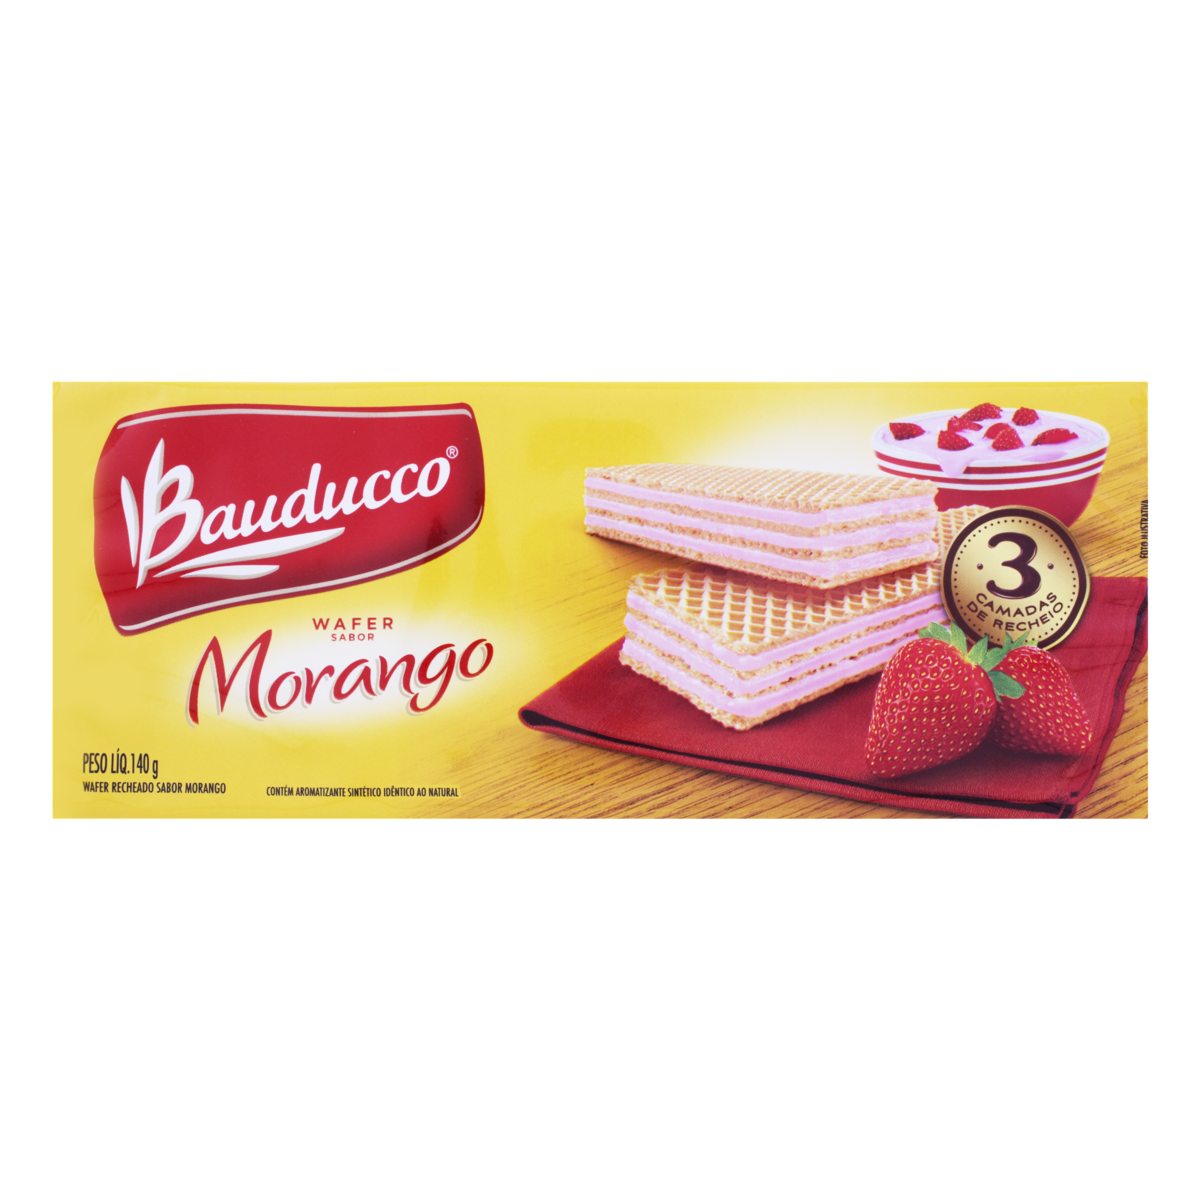 BAUDUCCO - Strawberry Wafer - 140 g - FINAL SALE - EXPIRED or CLOSE TO EXPIRY